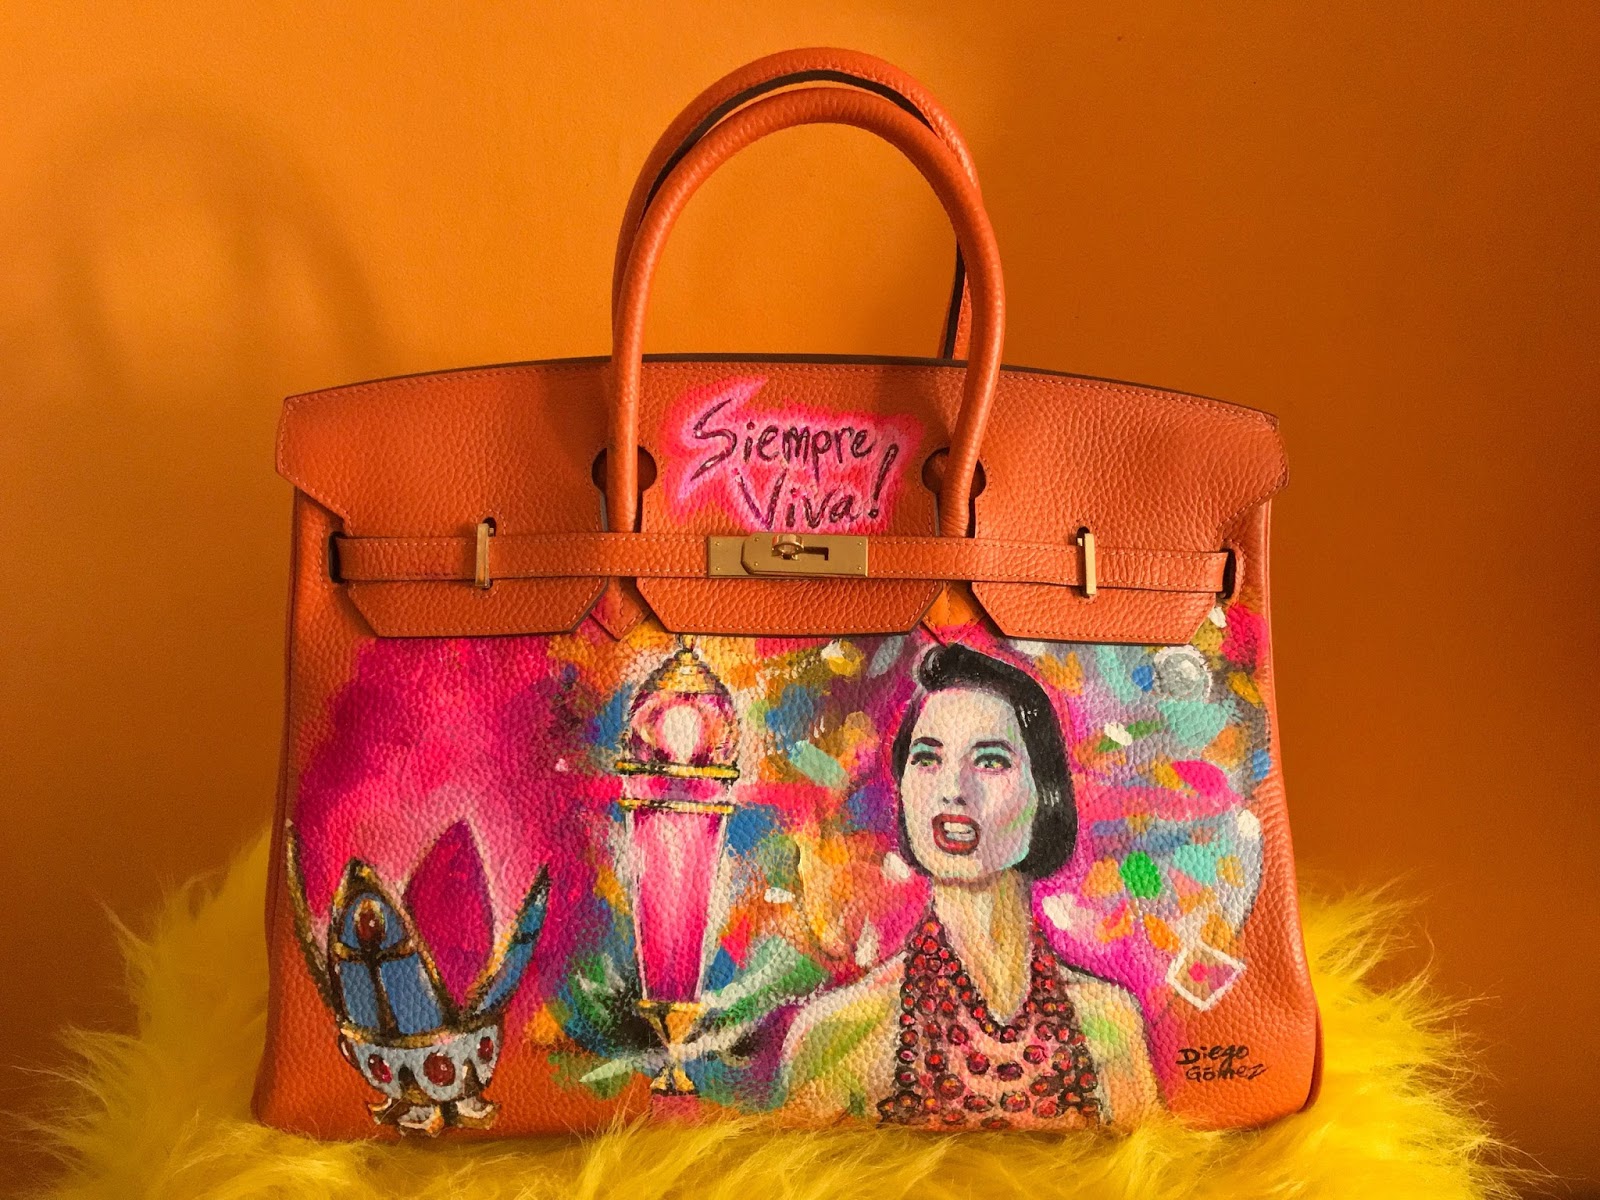 How I paint on Leather Bags. I painted on a Birkin Hermes Bag! Pinay artist  